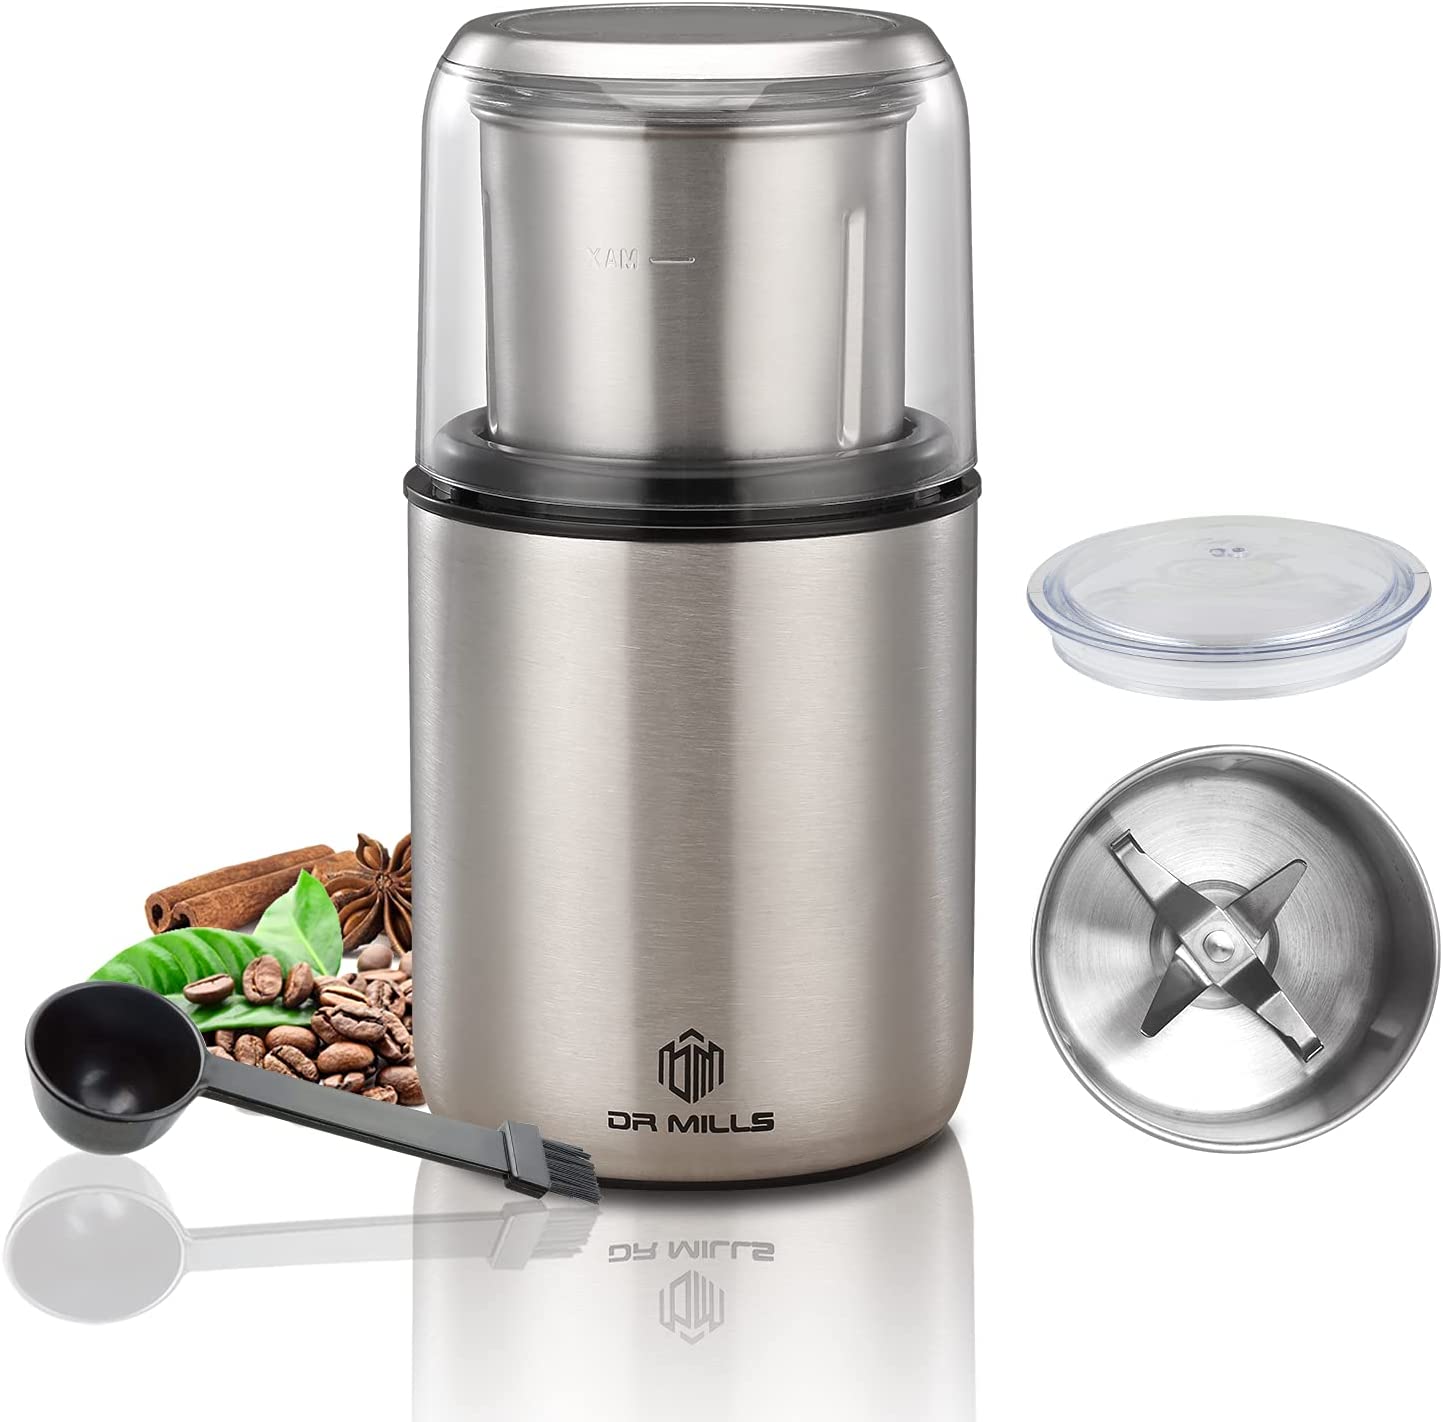 DR MILLS DM-7452 electric spice and coffee grinder, mill and chopper knife, removable cup, wash-free knife and wash-free cup are made of SUS304 stainless steel